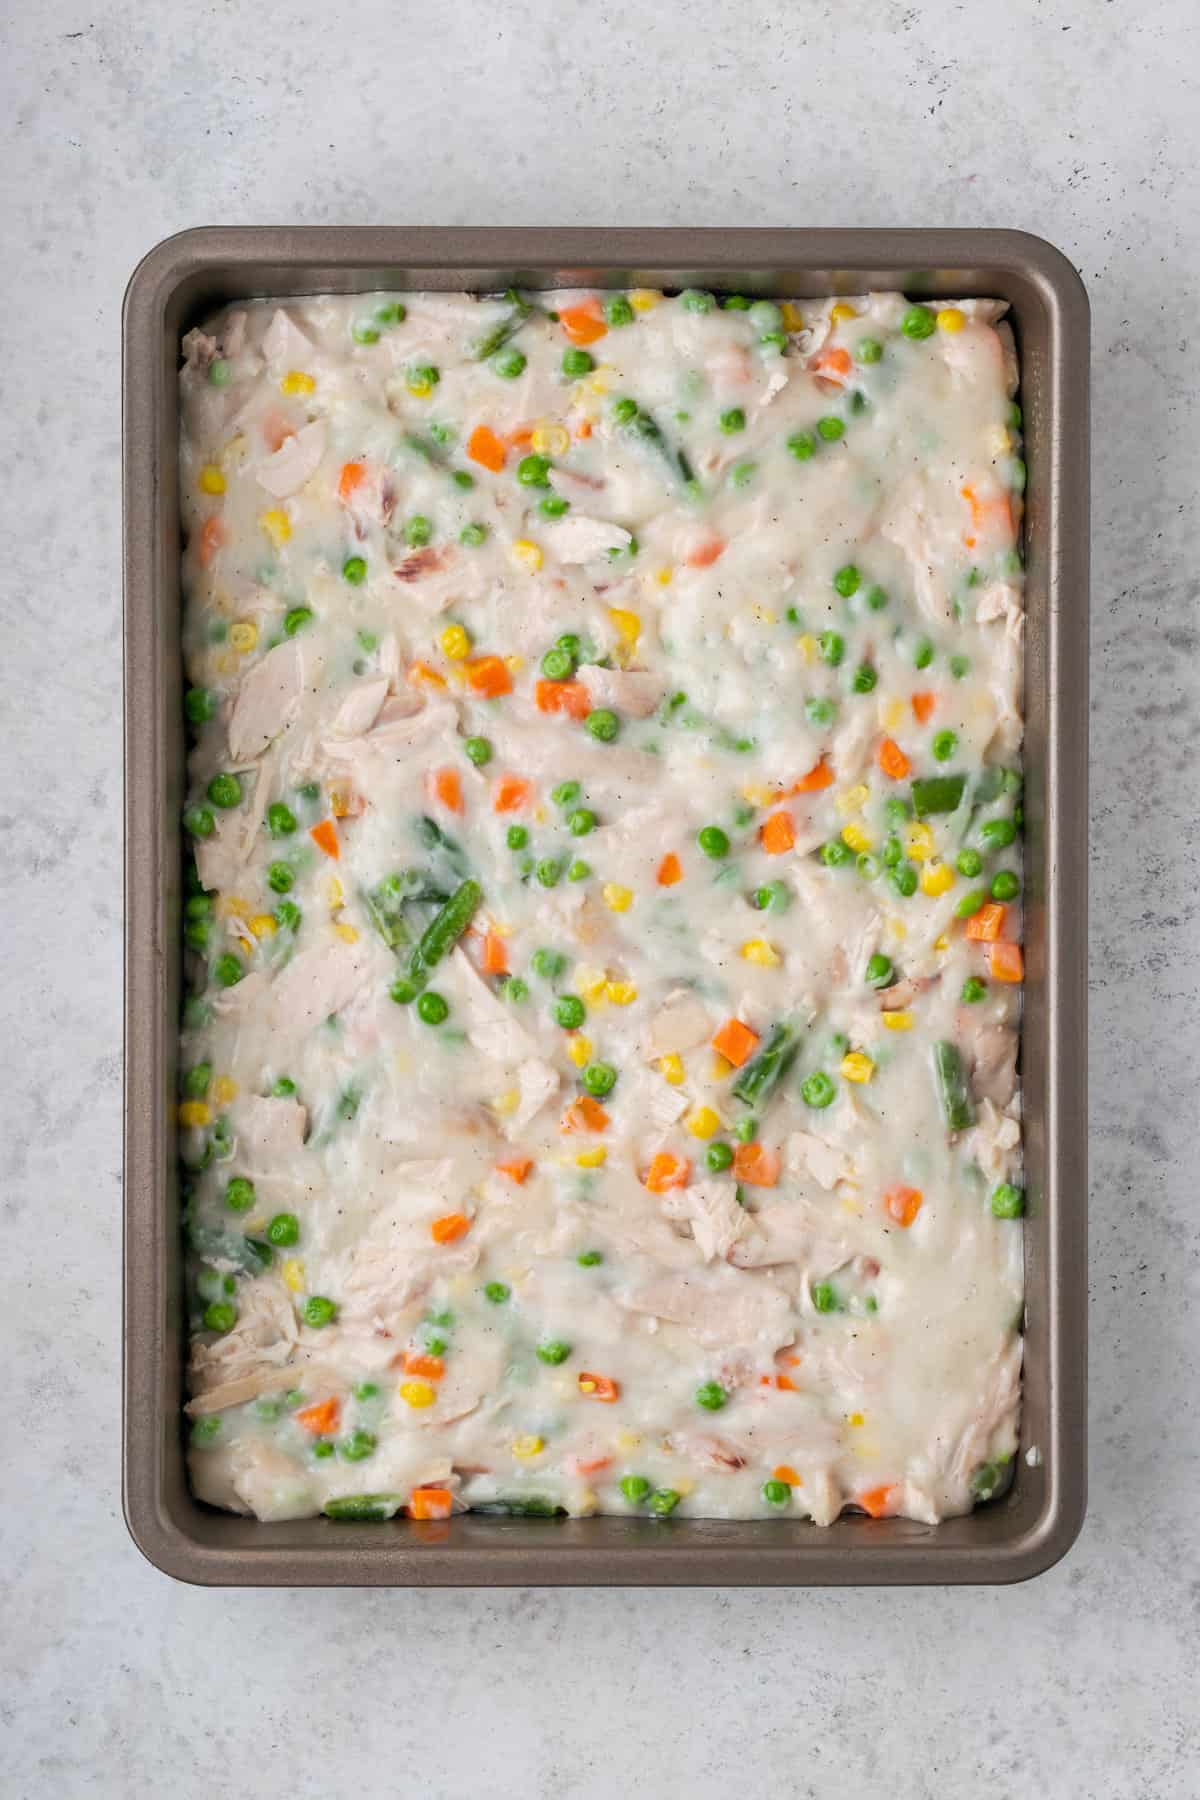 A layer of cream soup and vegetables is seen in a baking dish.